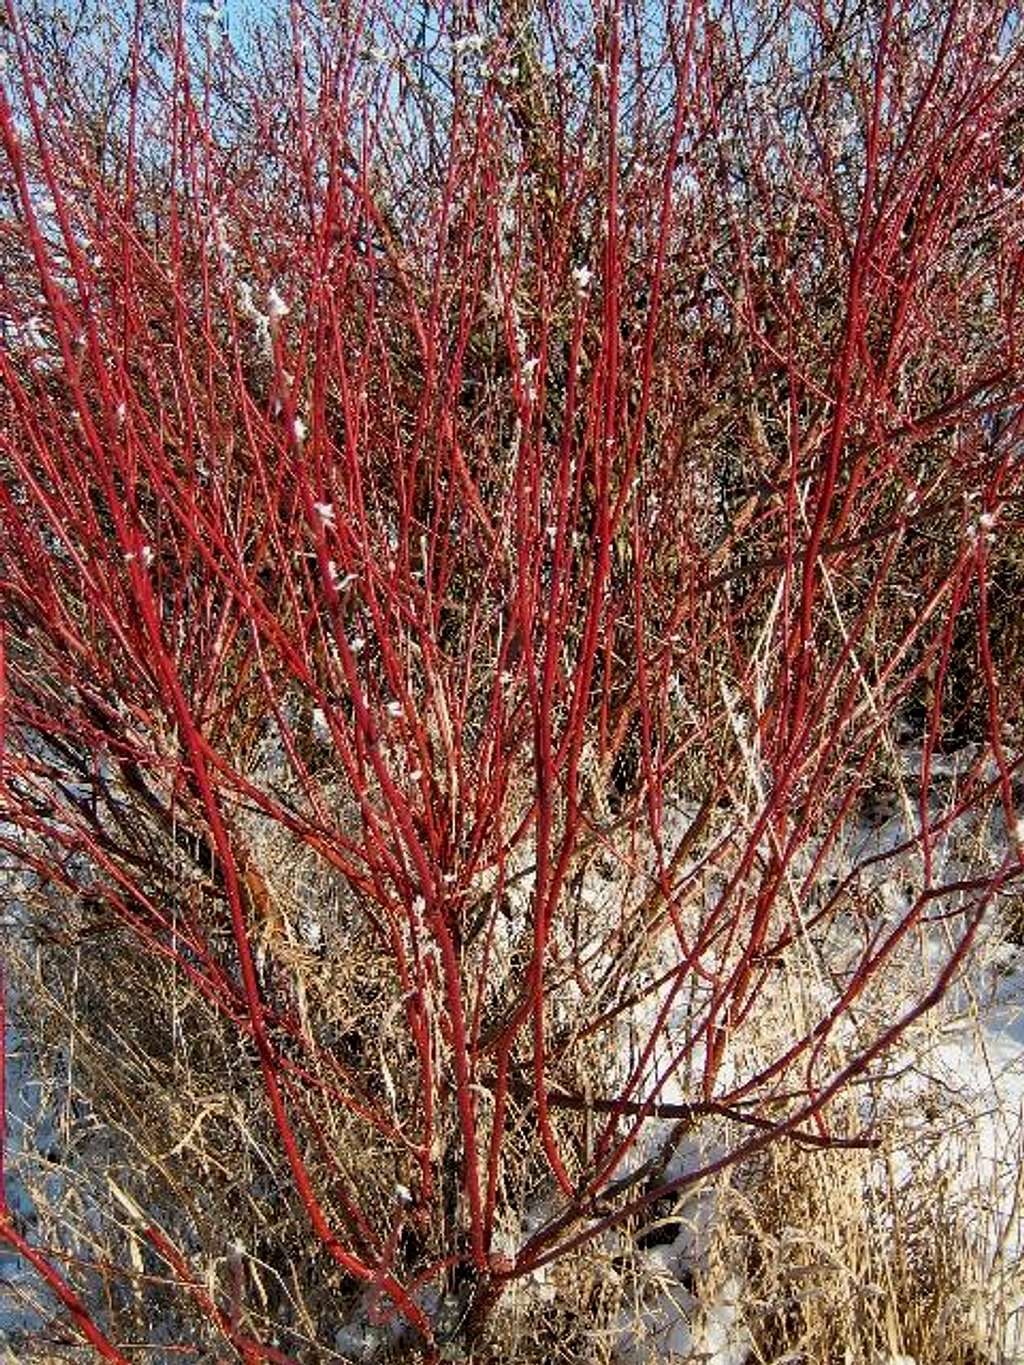 Branches of Bloodtwig Dogwood in winter.